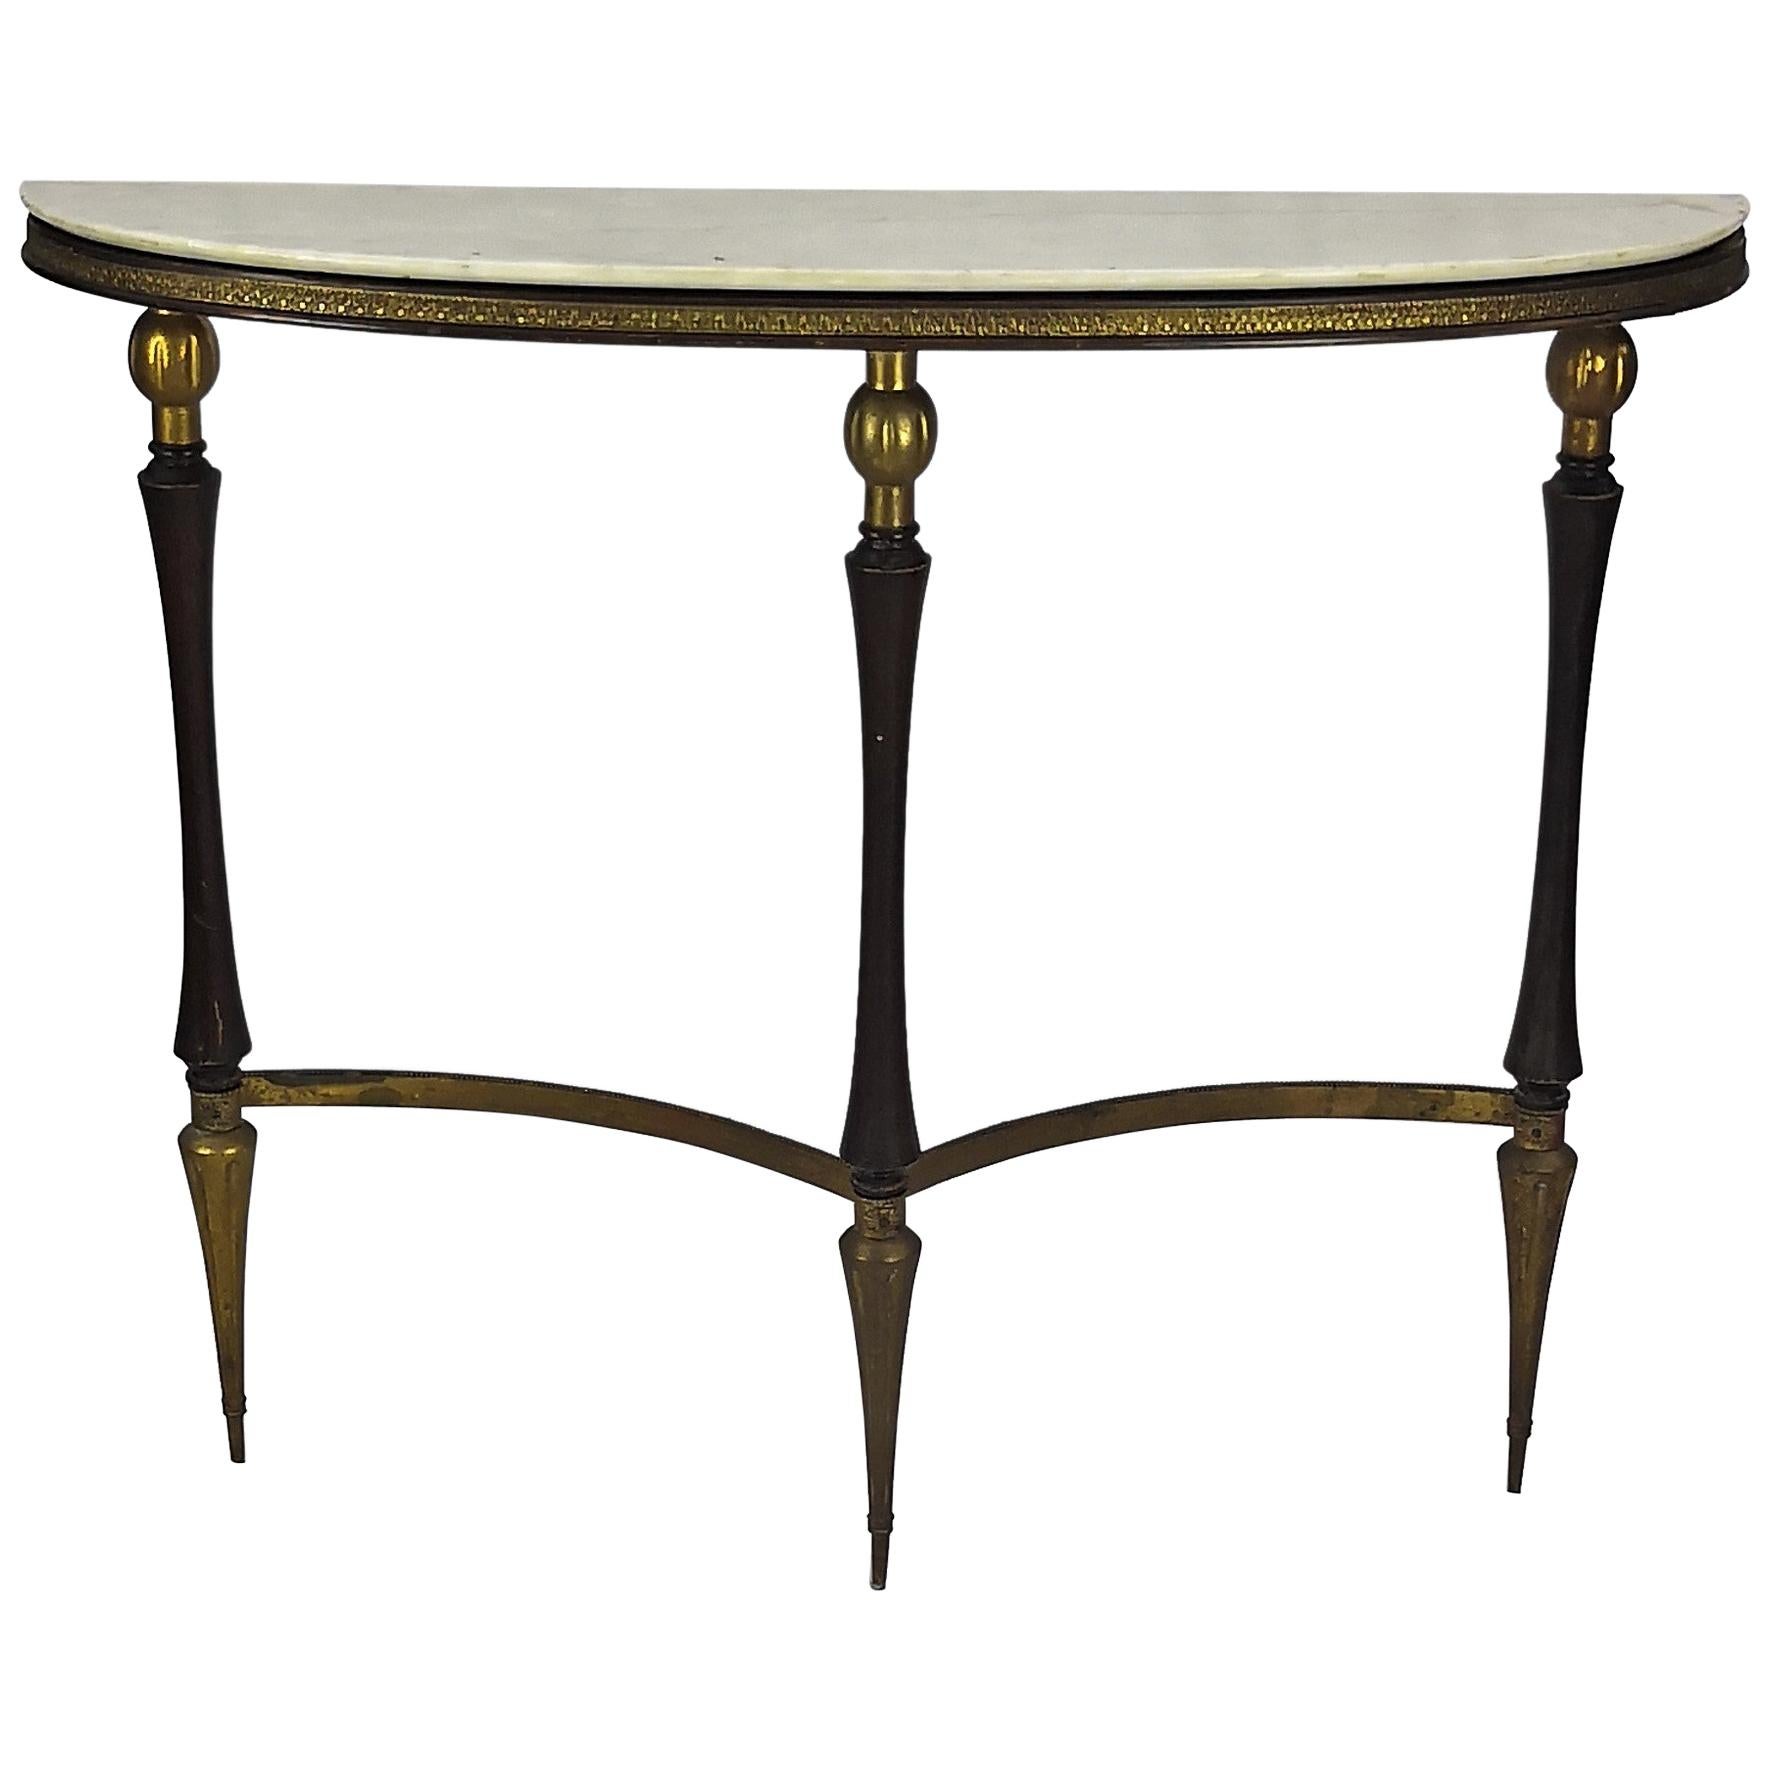 1950s Midcentury Italian Wood and Brass Demilune Consolle Table with Marble top